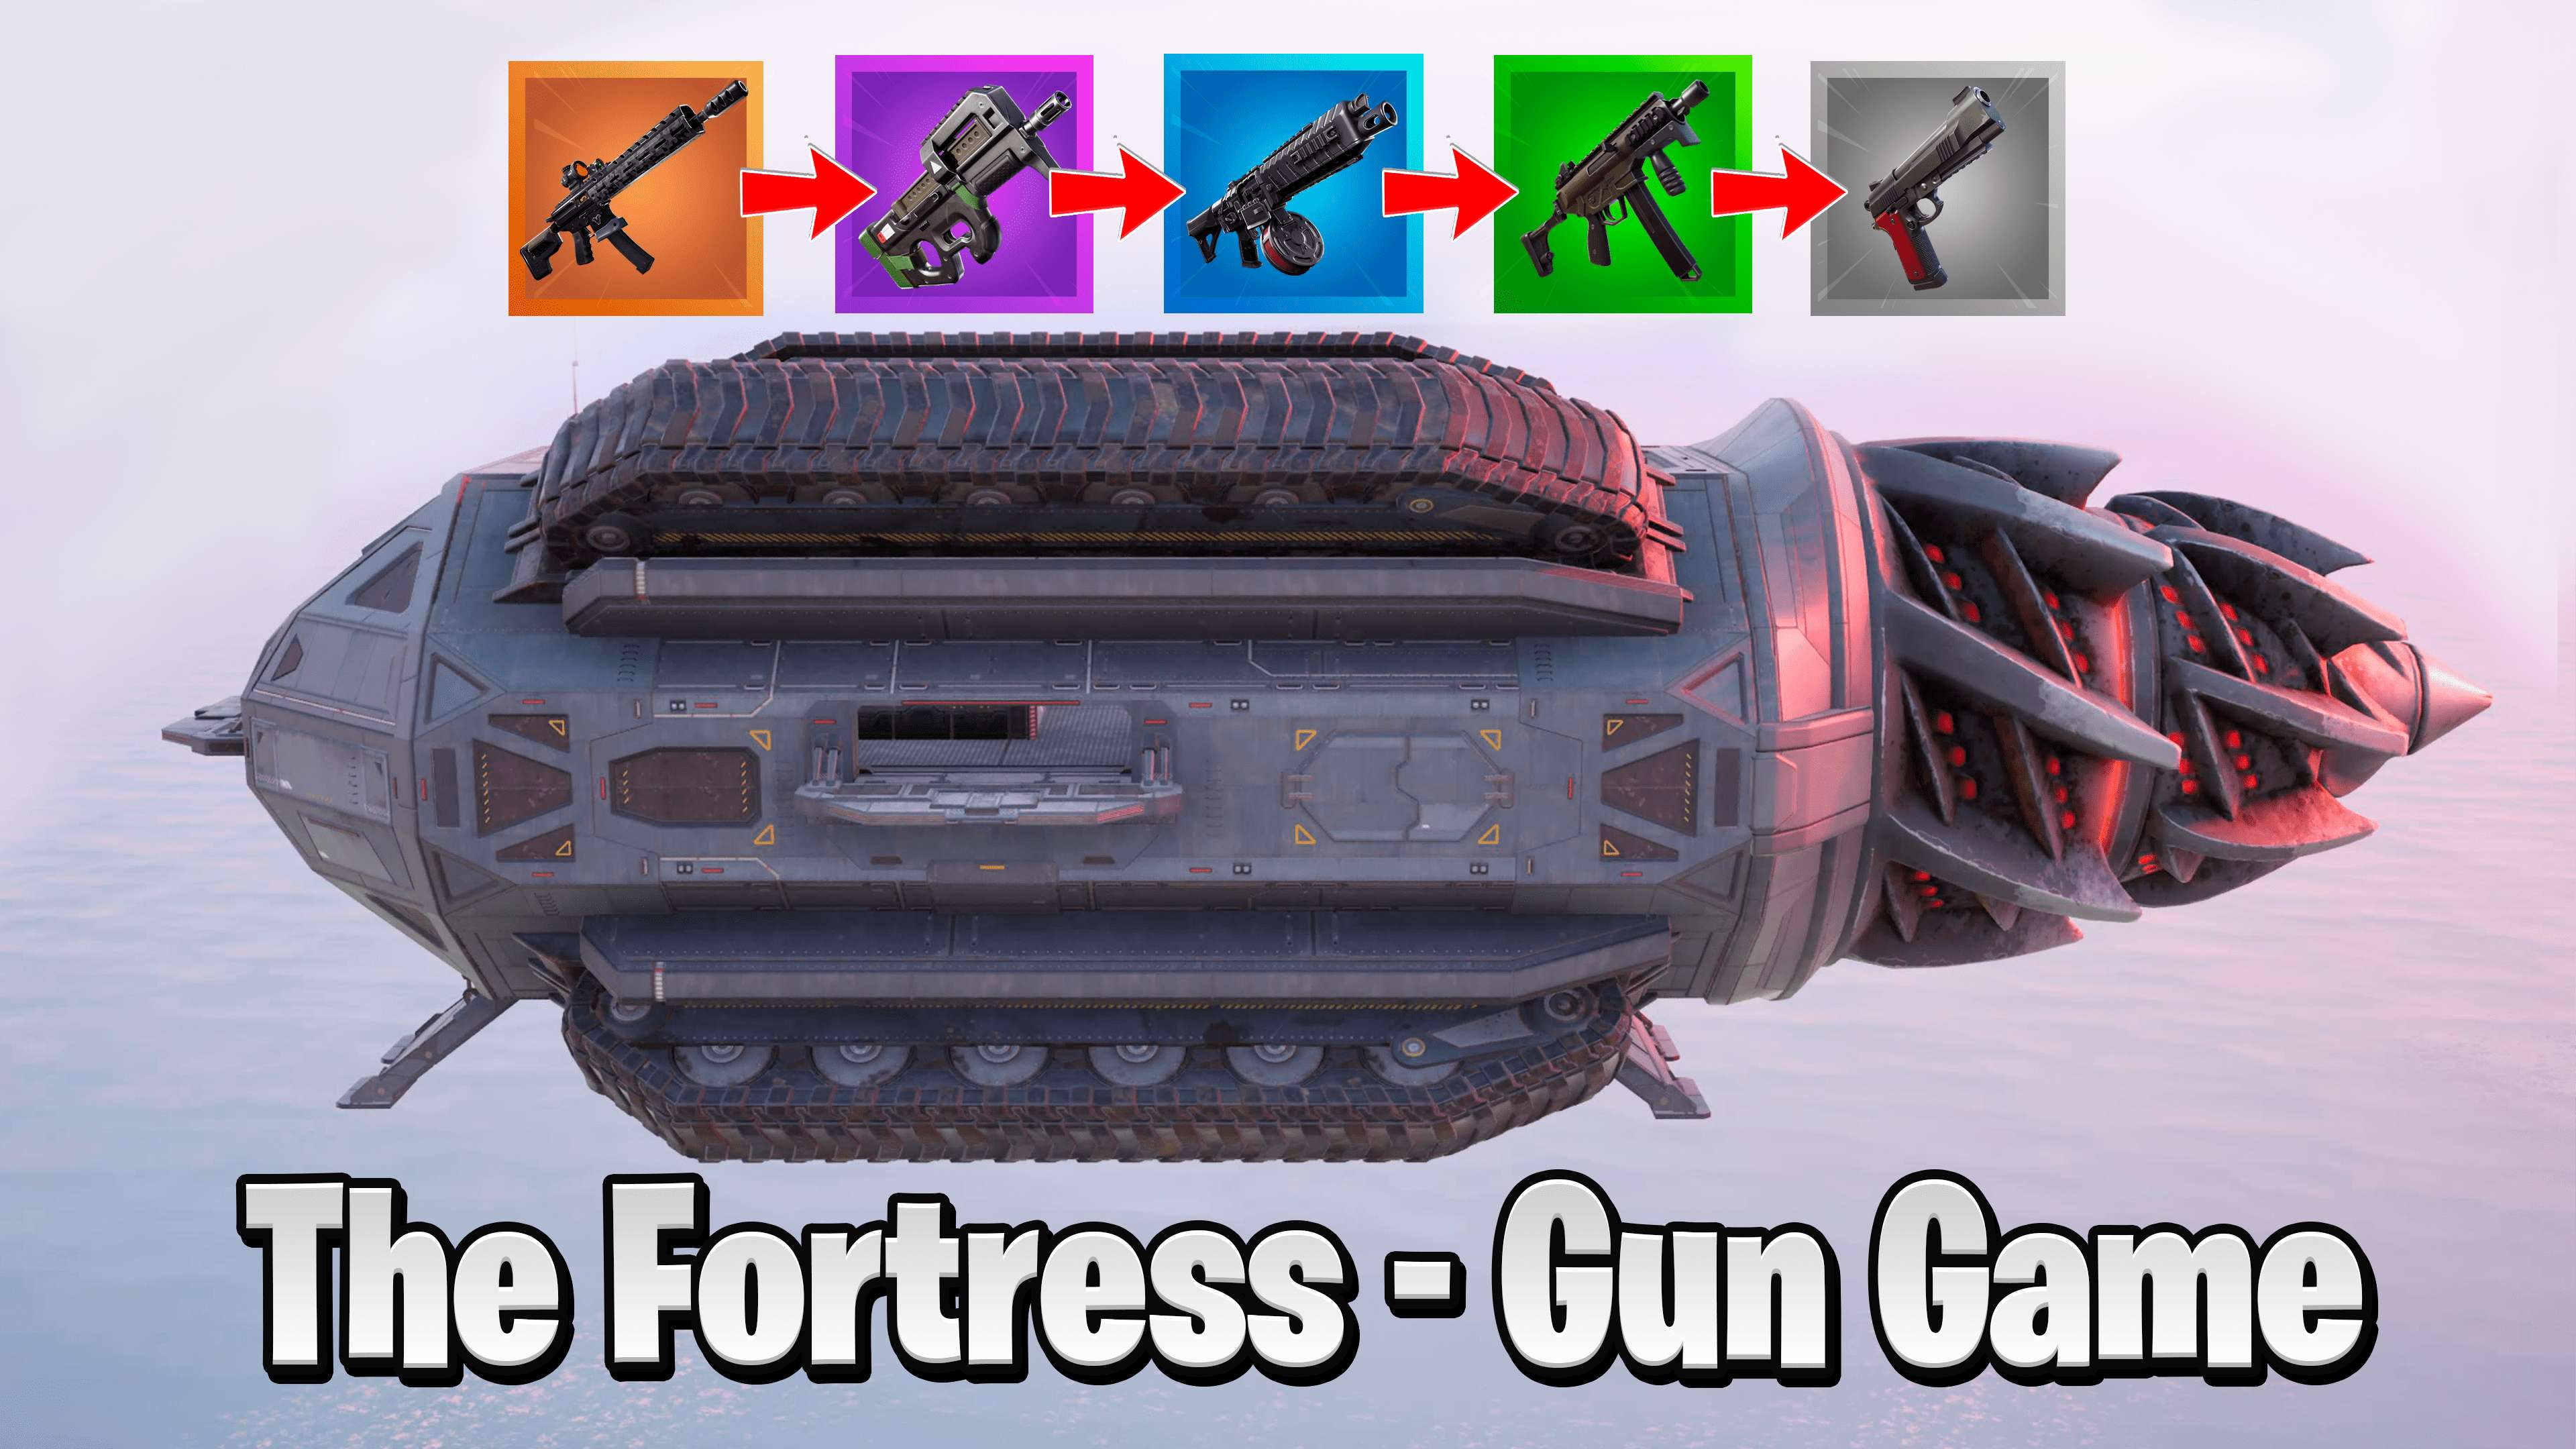 THE FORTRESS - GUN GAME